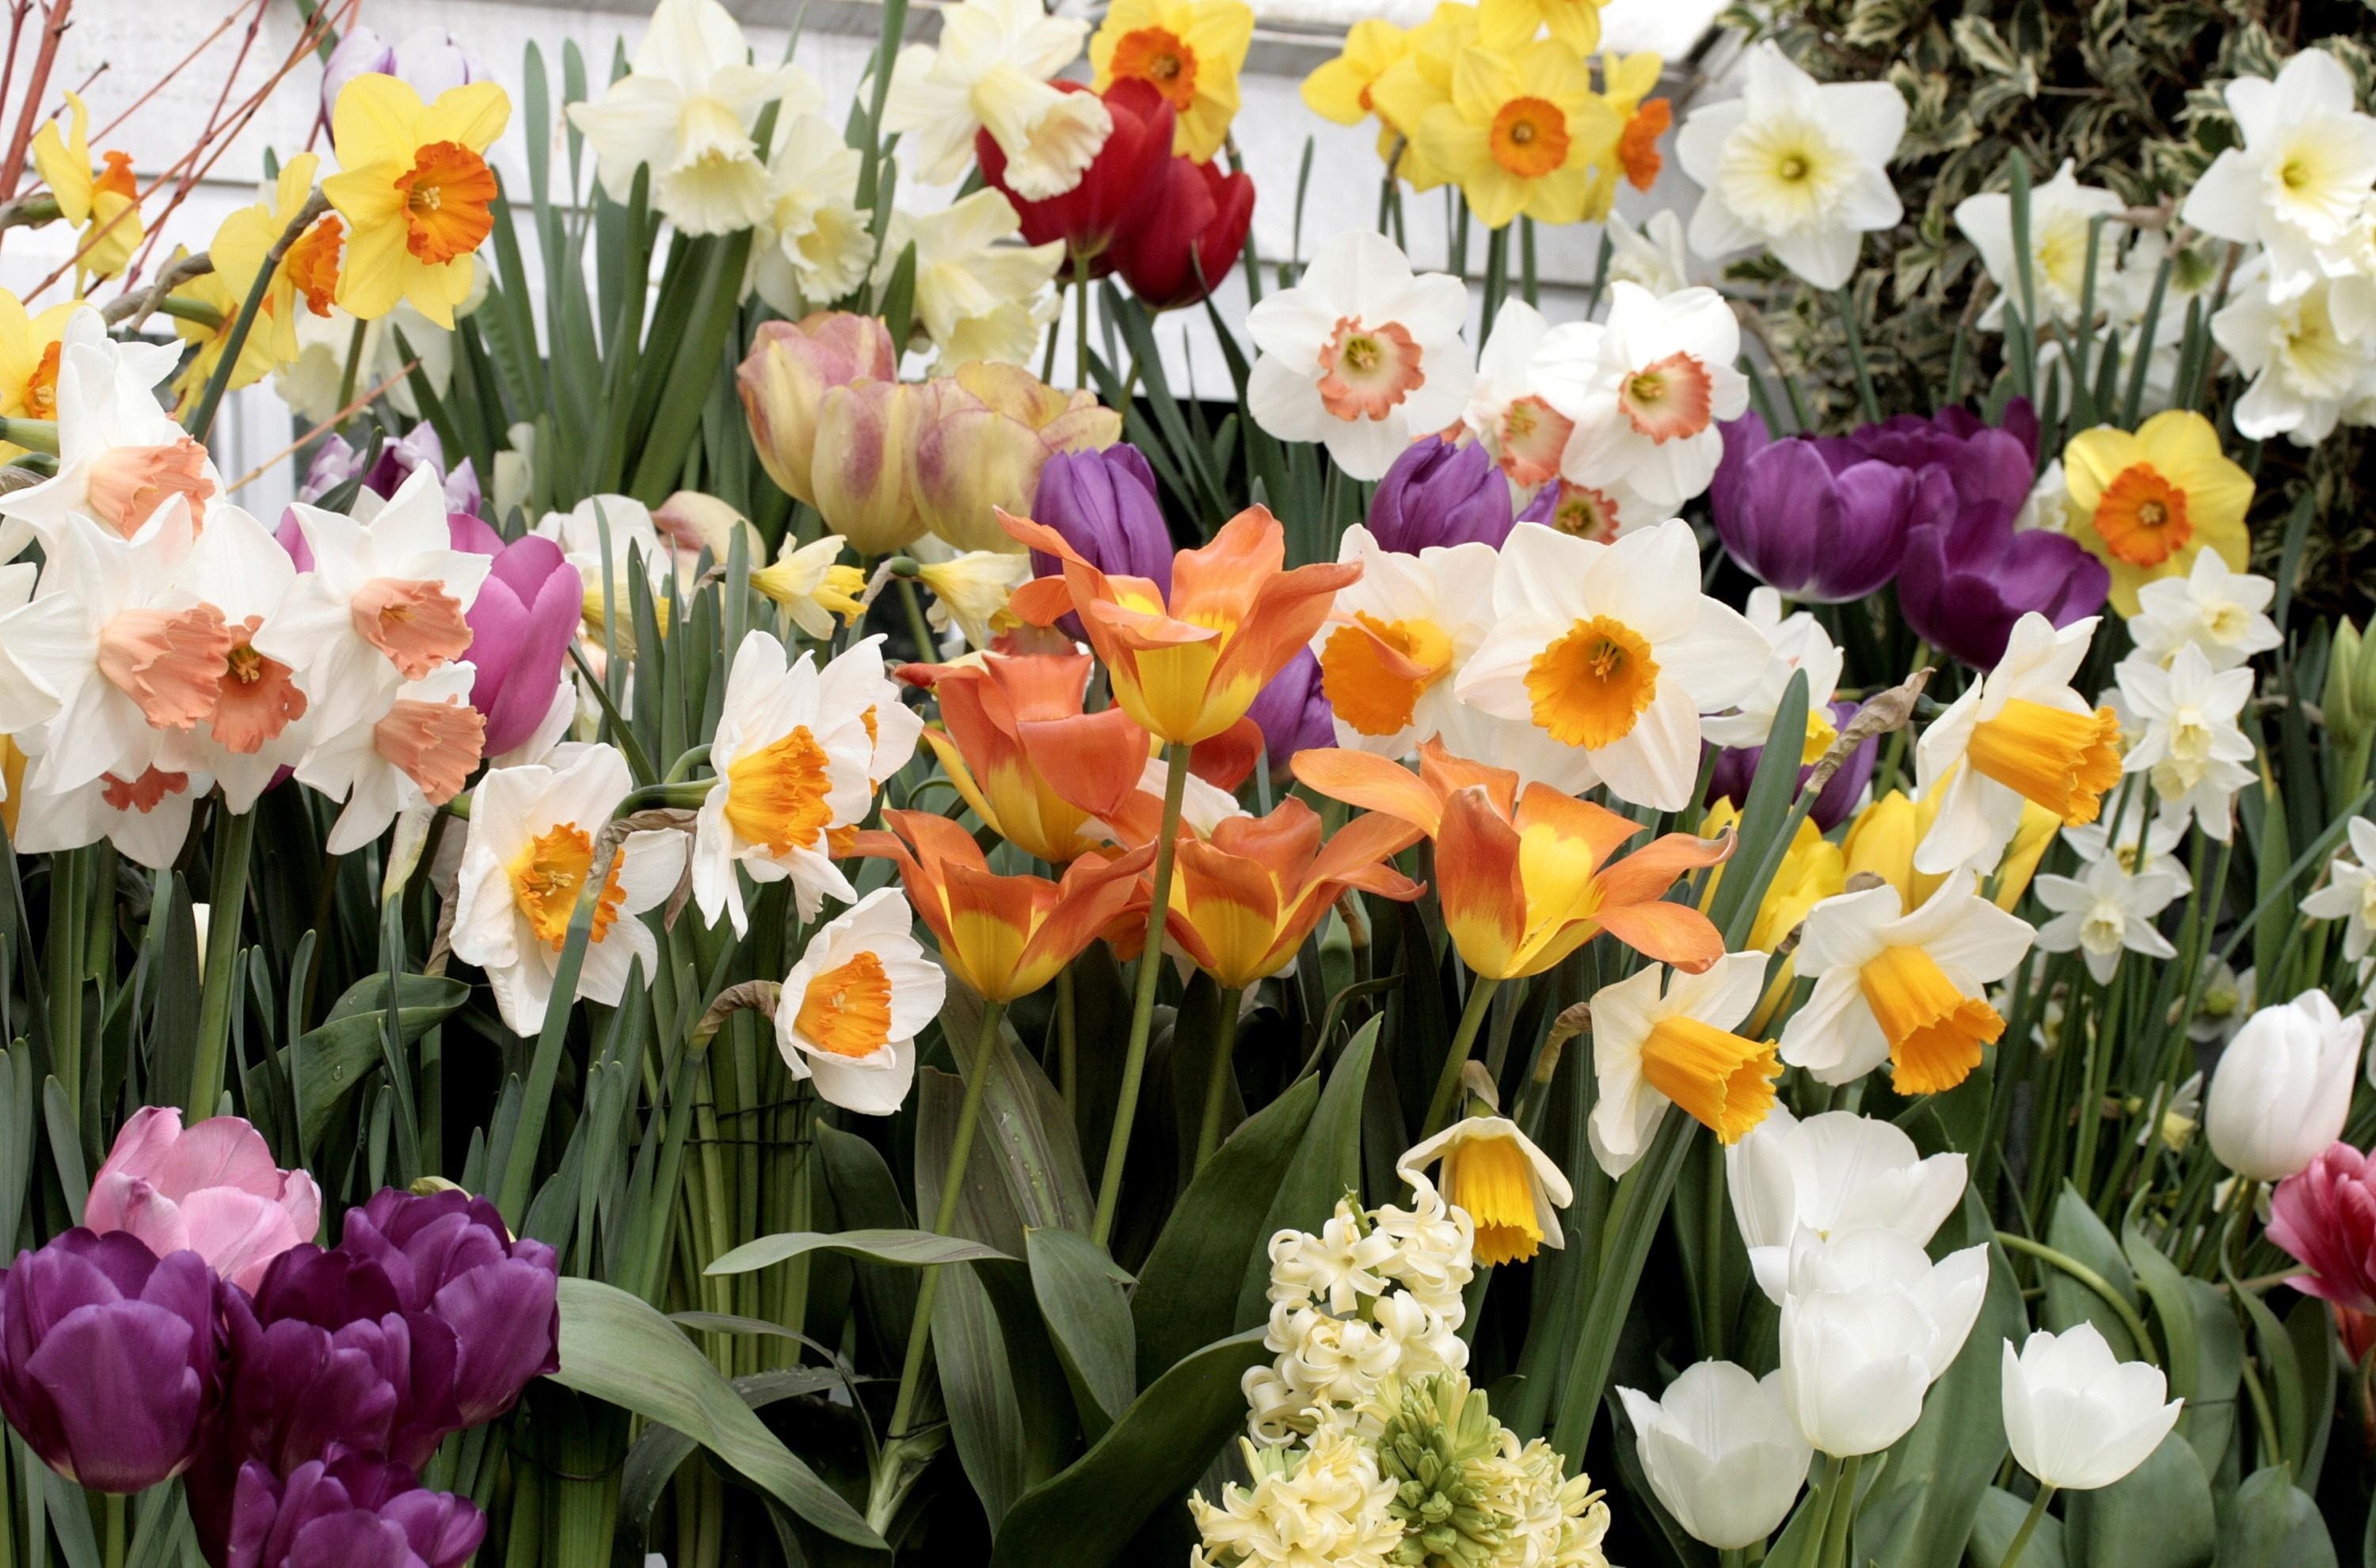 flowers, tulips, narcissussi, hyacinth, flower bed, flowerbed, lots of, multitude 1080p